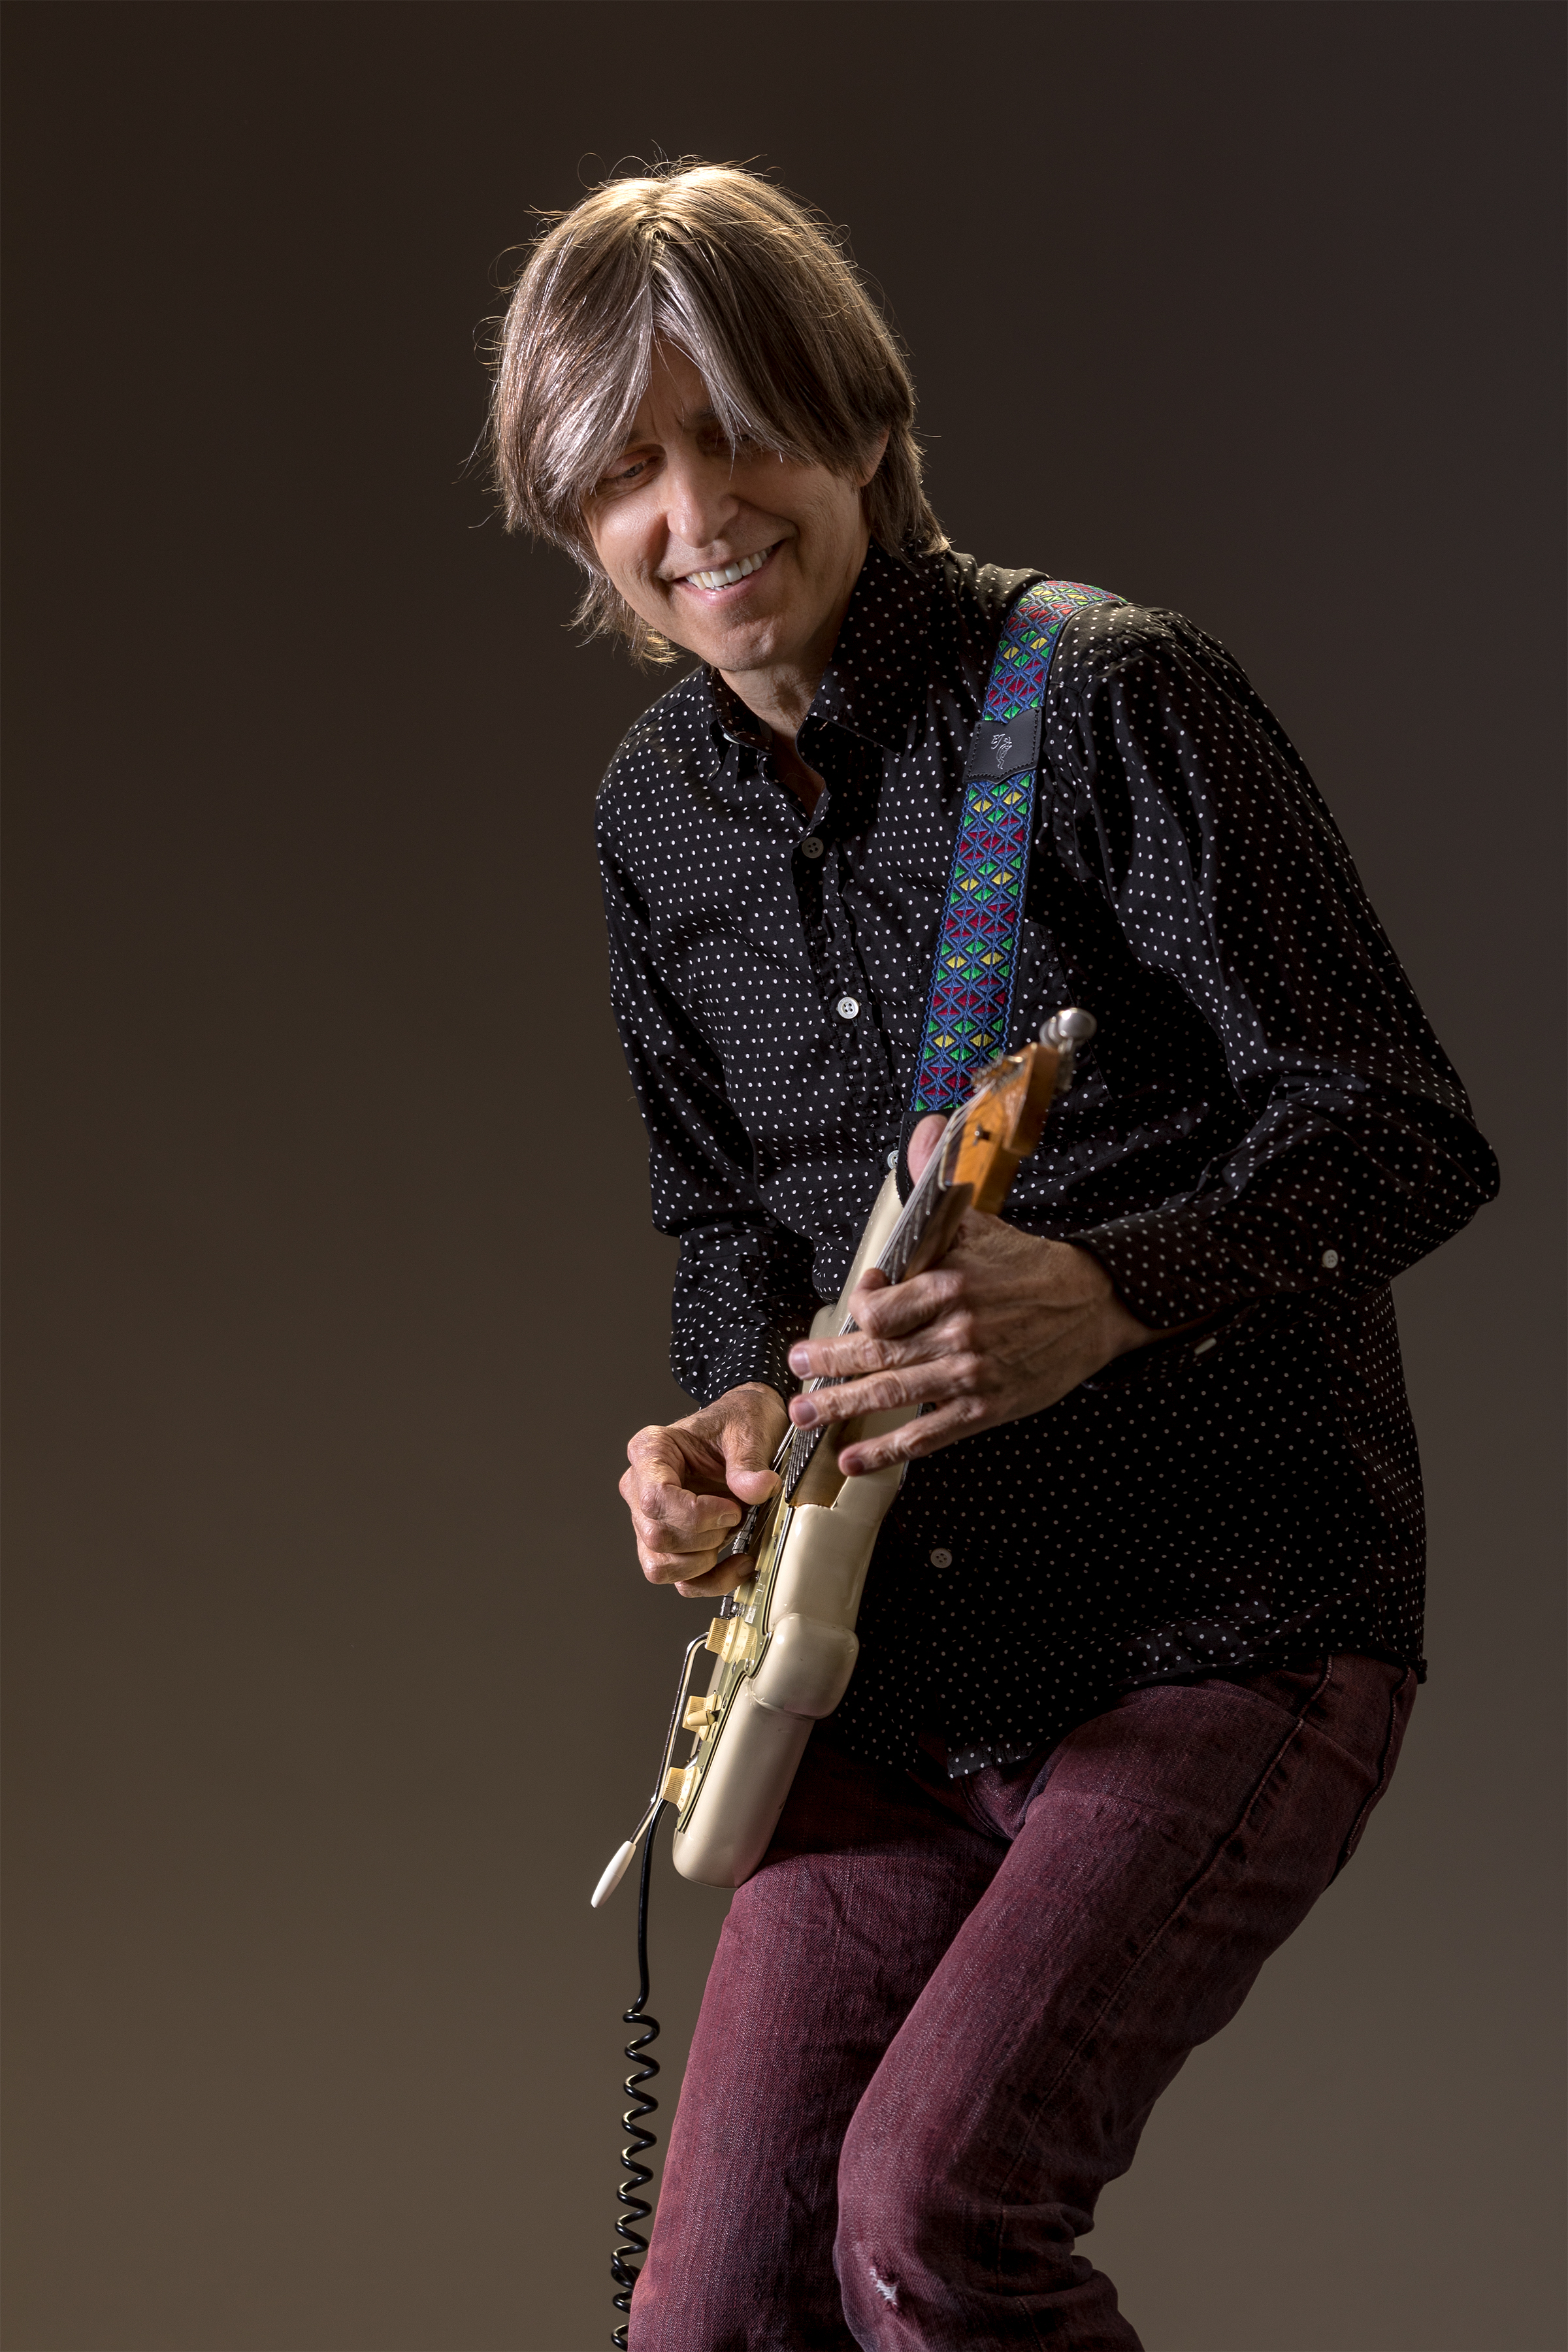 Eric Johnson by Max Crace